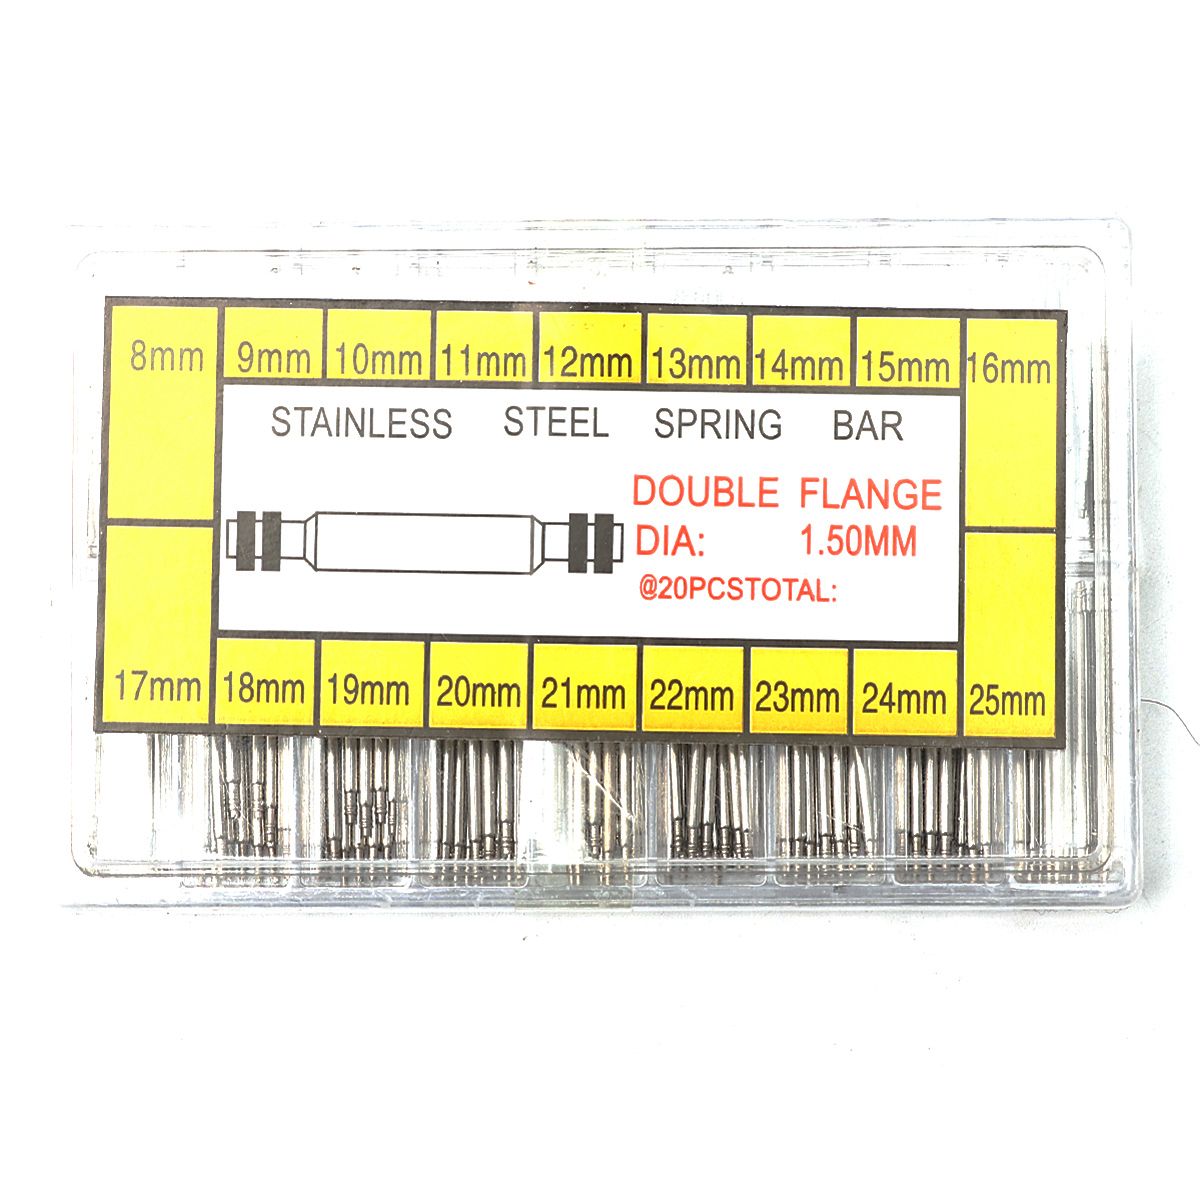 380Pcs-Watch-Repair-Tool-Kit-8mm25mm-Spring-Bars-Strap-Pins-Link-Remover-Wrench-1186098